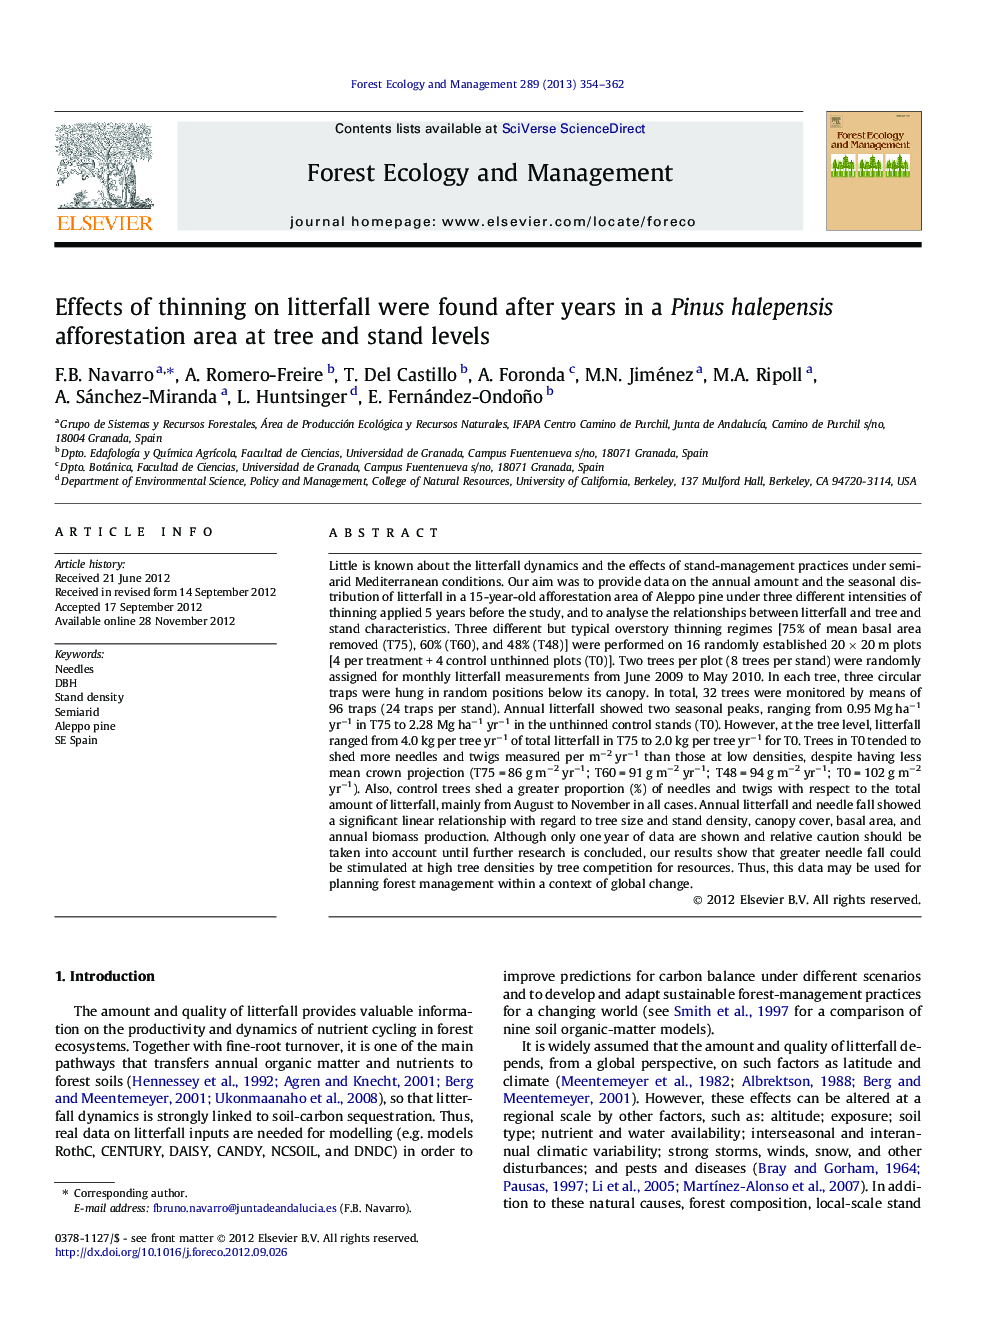 Effects of thinning on litterfall were found after years in a Pinus halepensis afforestation area at tree and stand levels